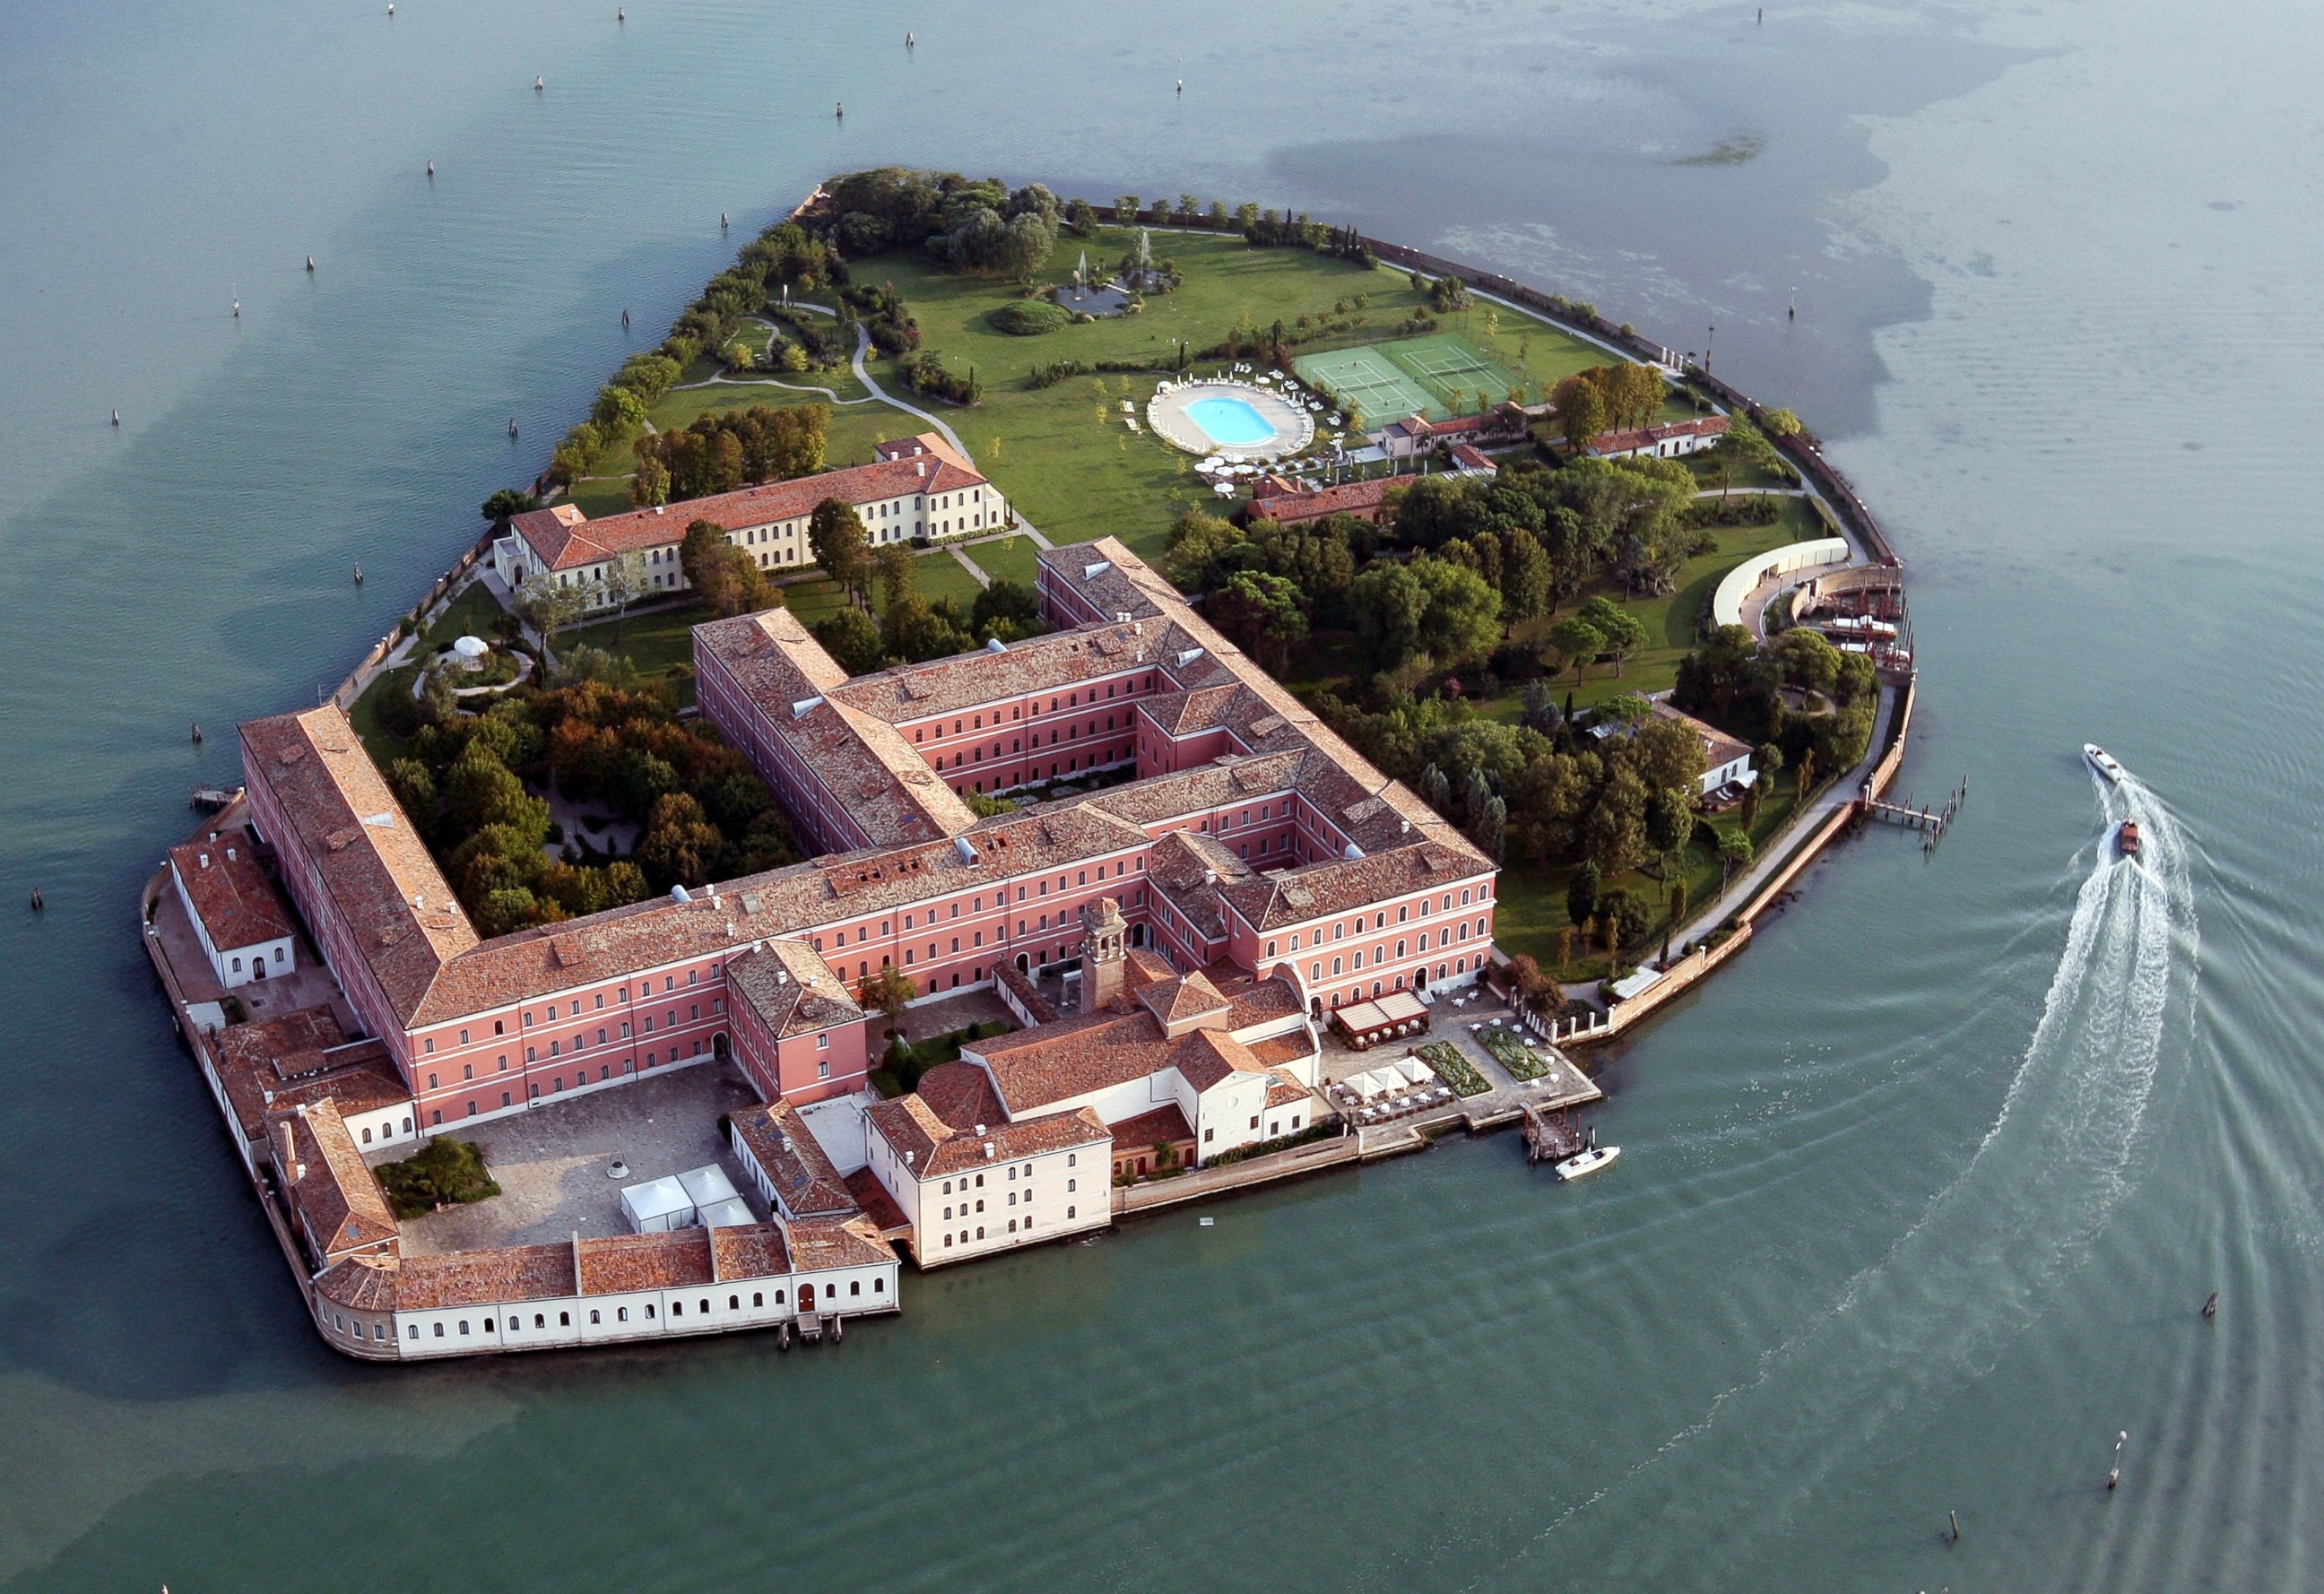 PHOTO: The San Clemente Palace Hotel & Resort is pictured on Sept. 1, 2008 in Venice, Italy.  